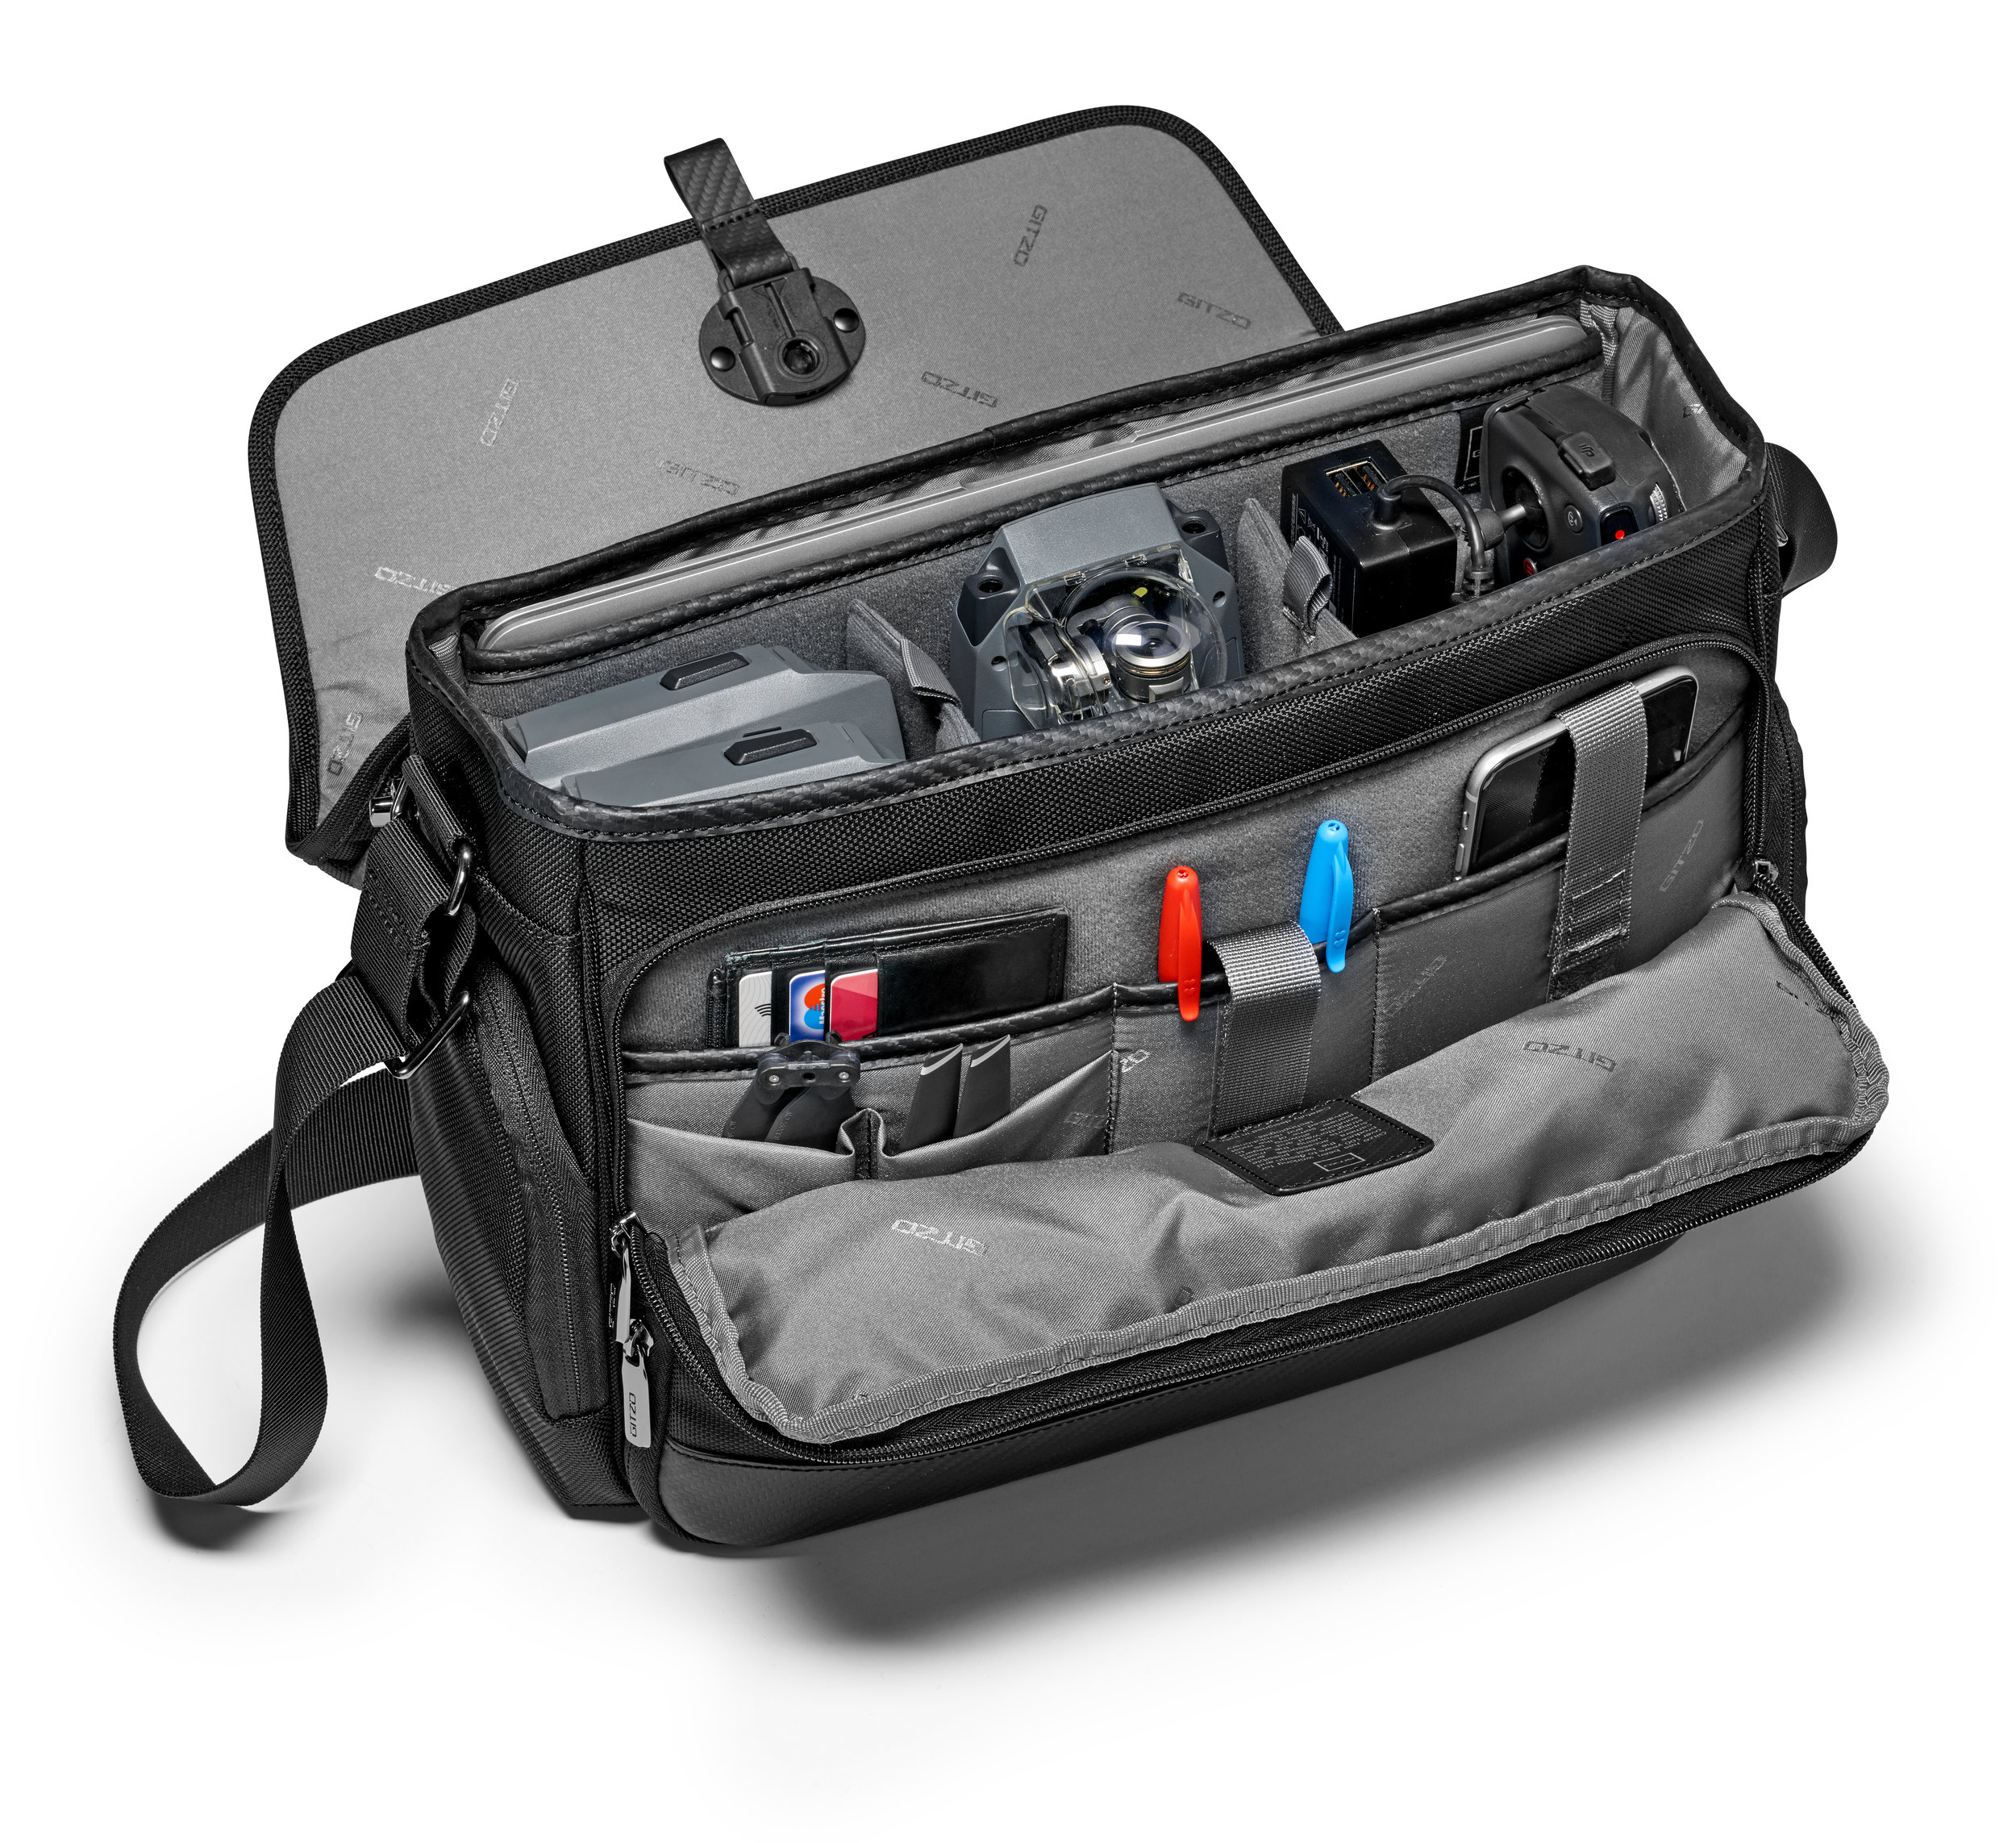 Gitzo Launches Century Camera Bag Collection in Celebration of 100th ...